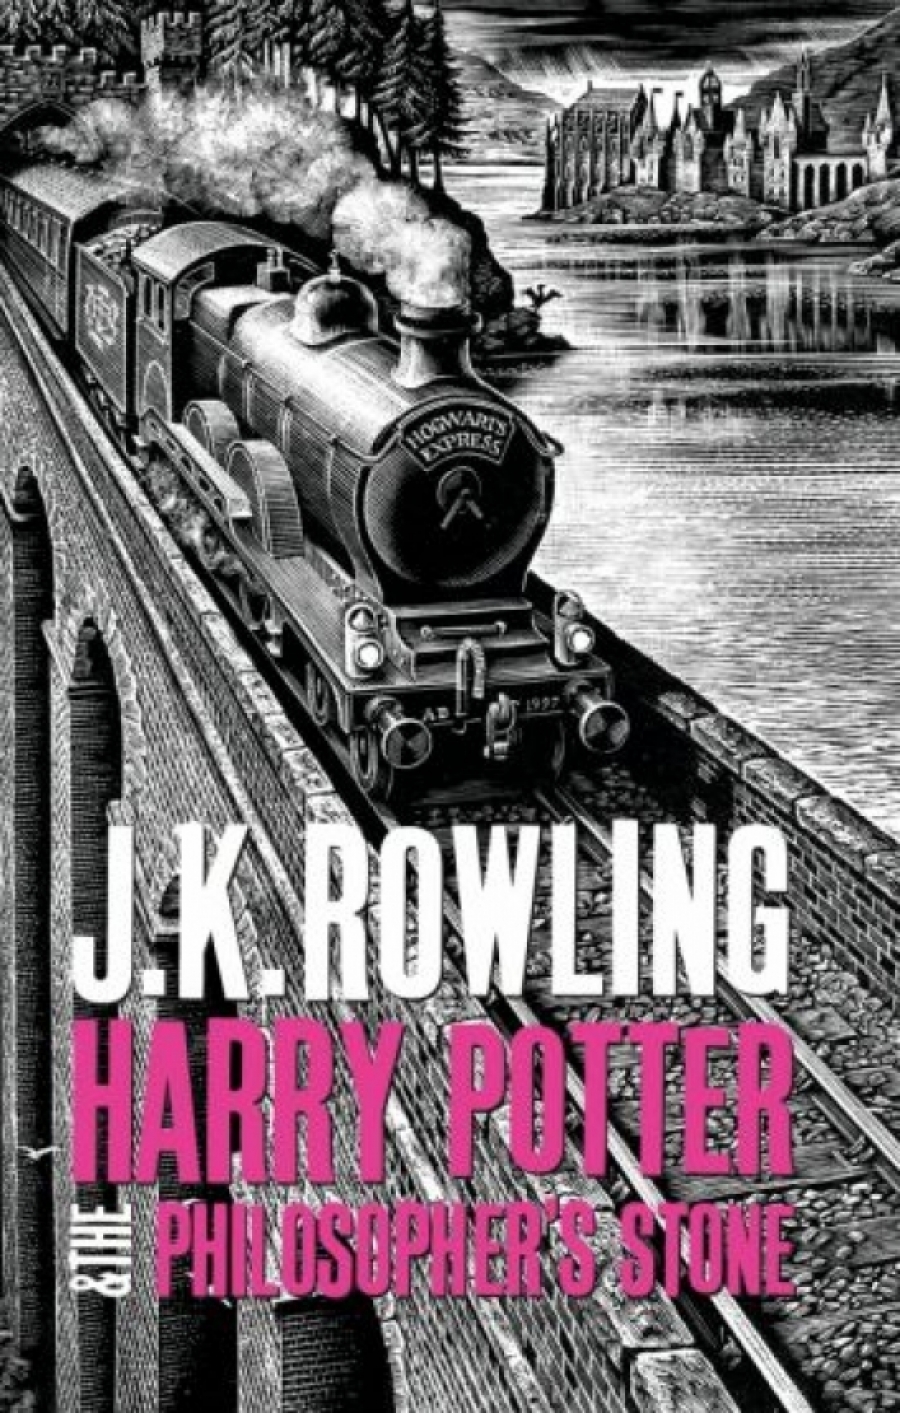 Rowling J.K. Harry Potter and the Philosopher's Stone HB 